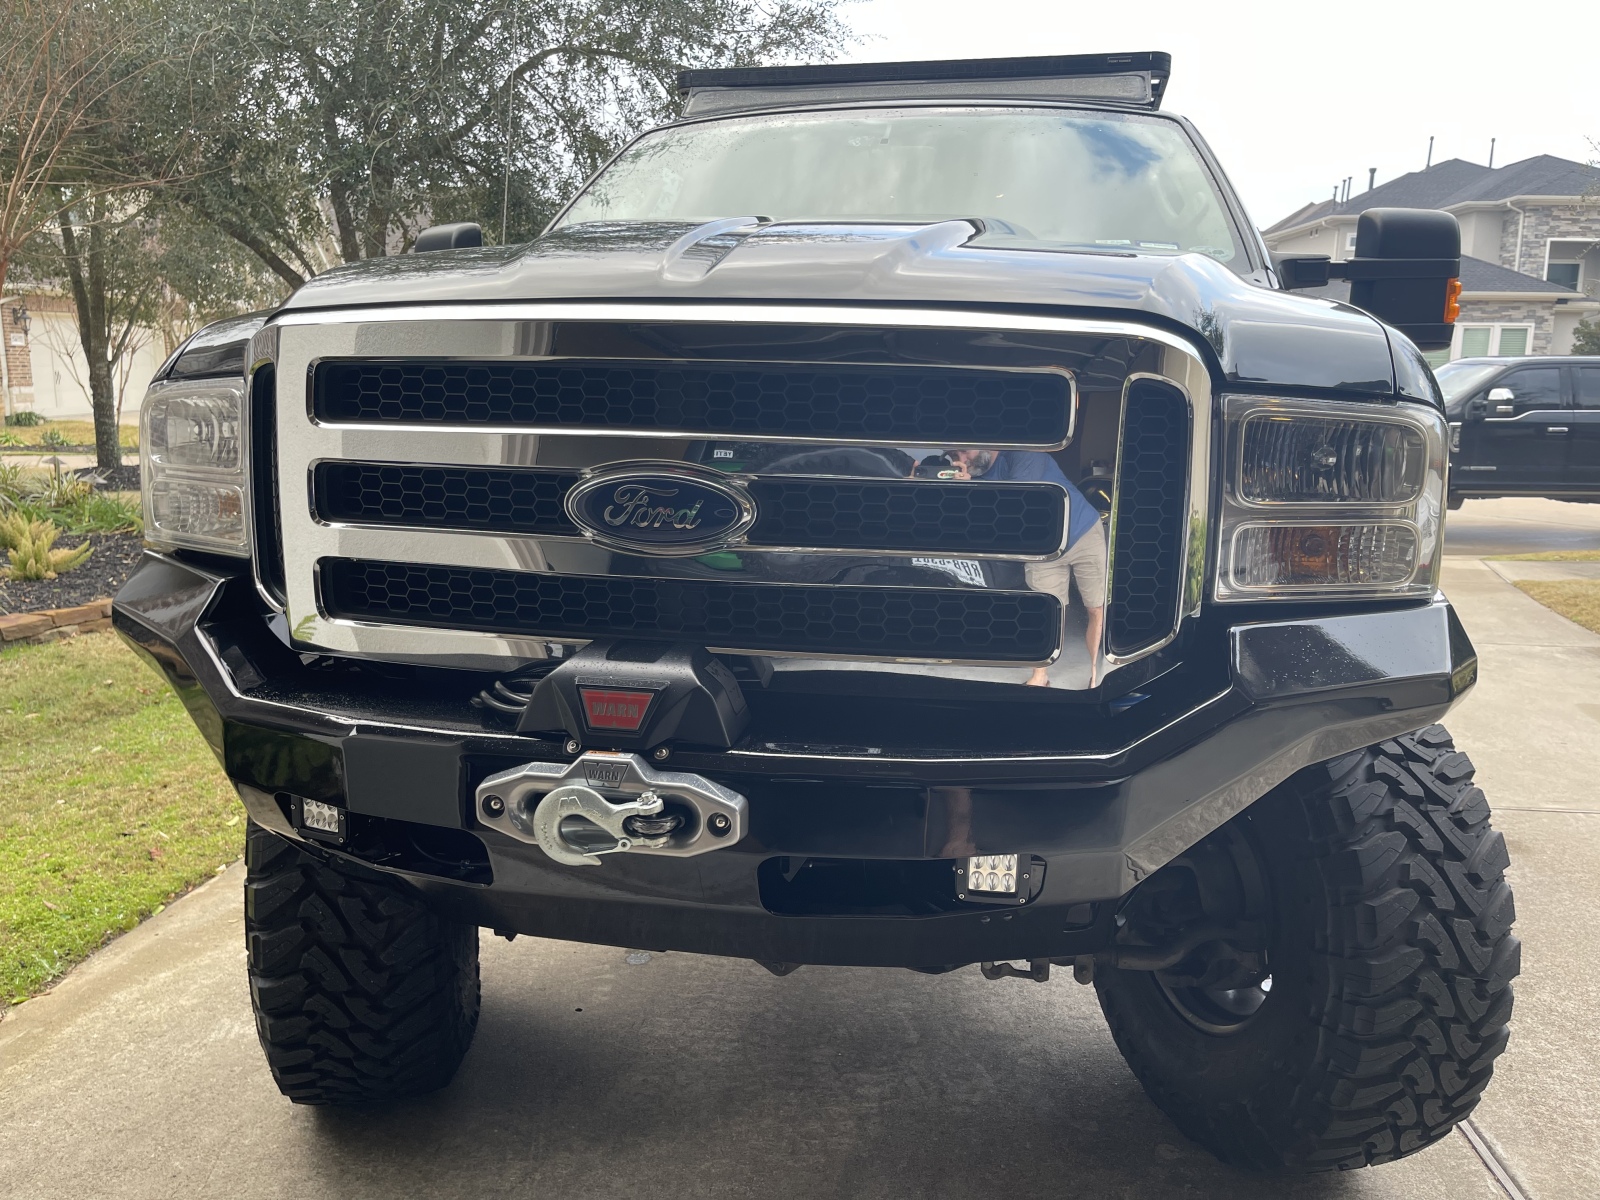 For Sale: Excursion tow & OffRoad rig 56k miles - photo1